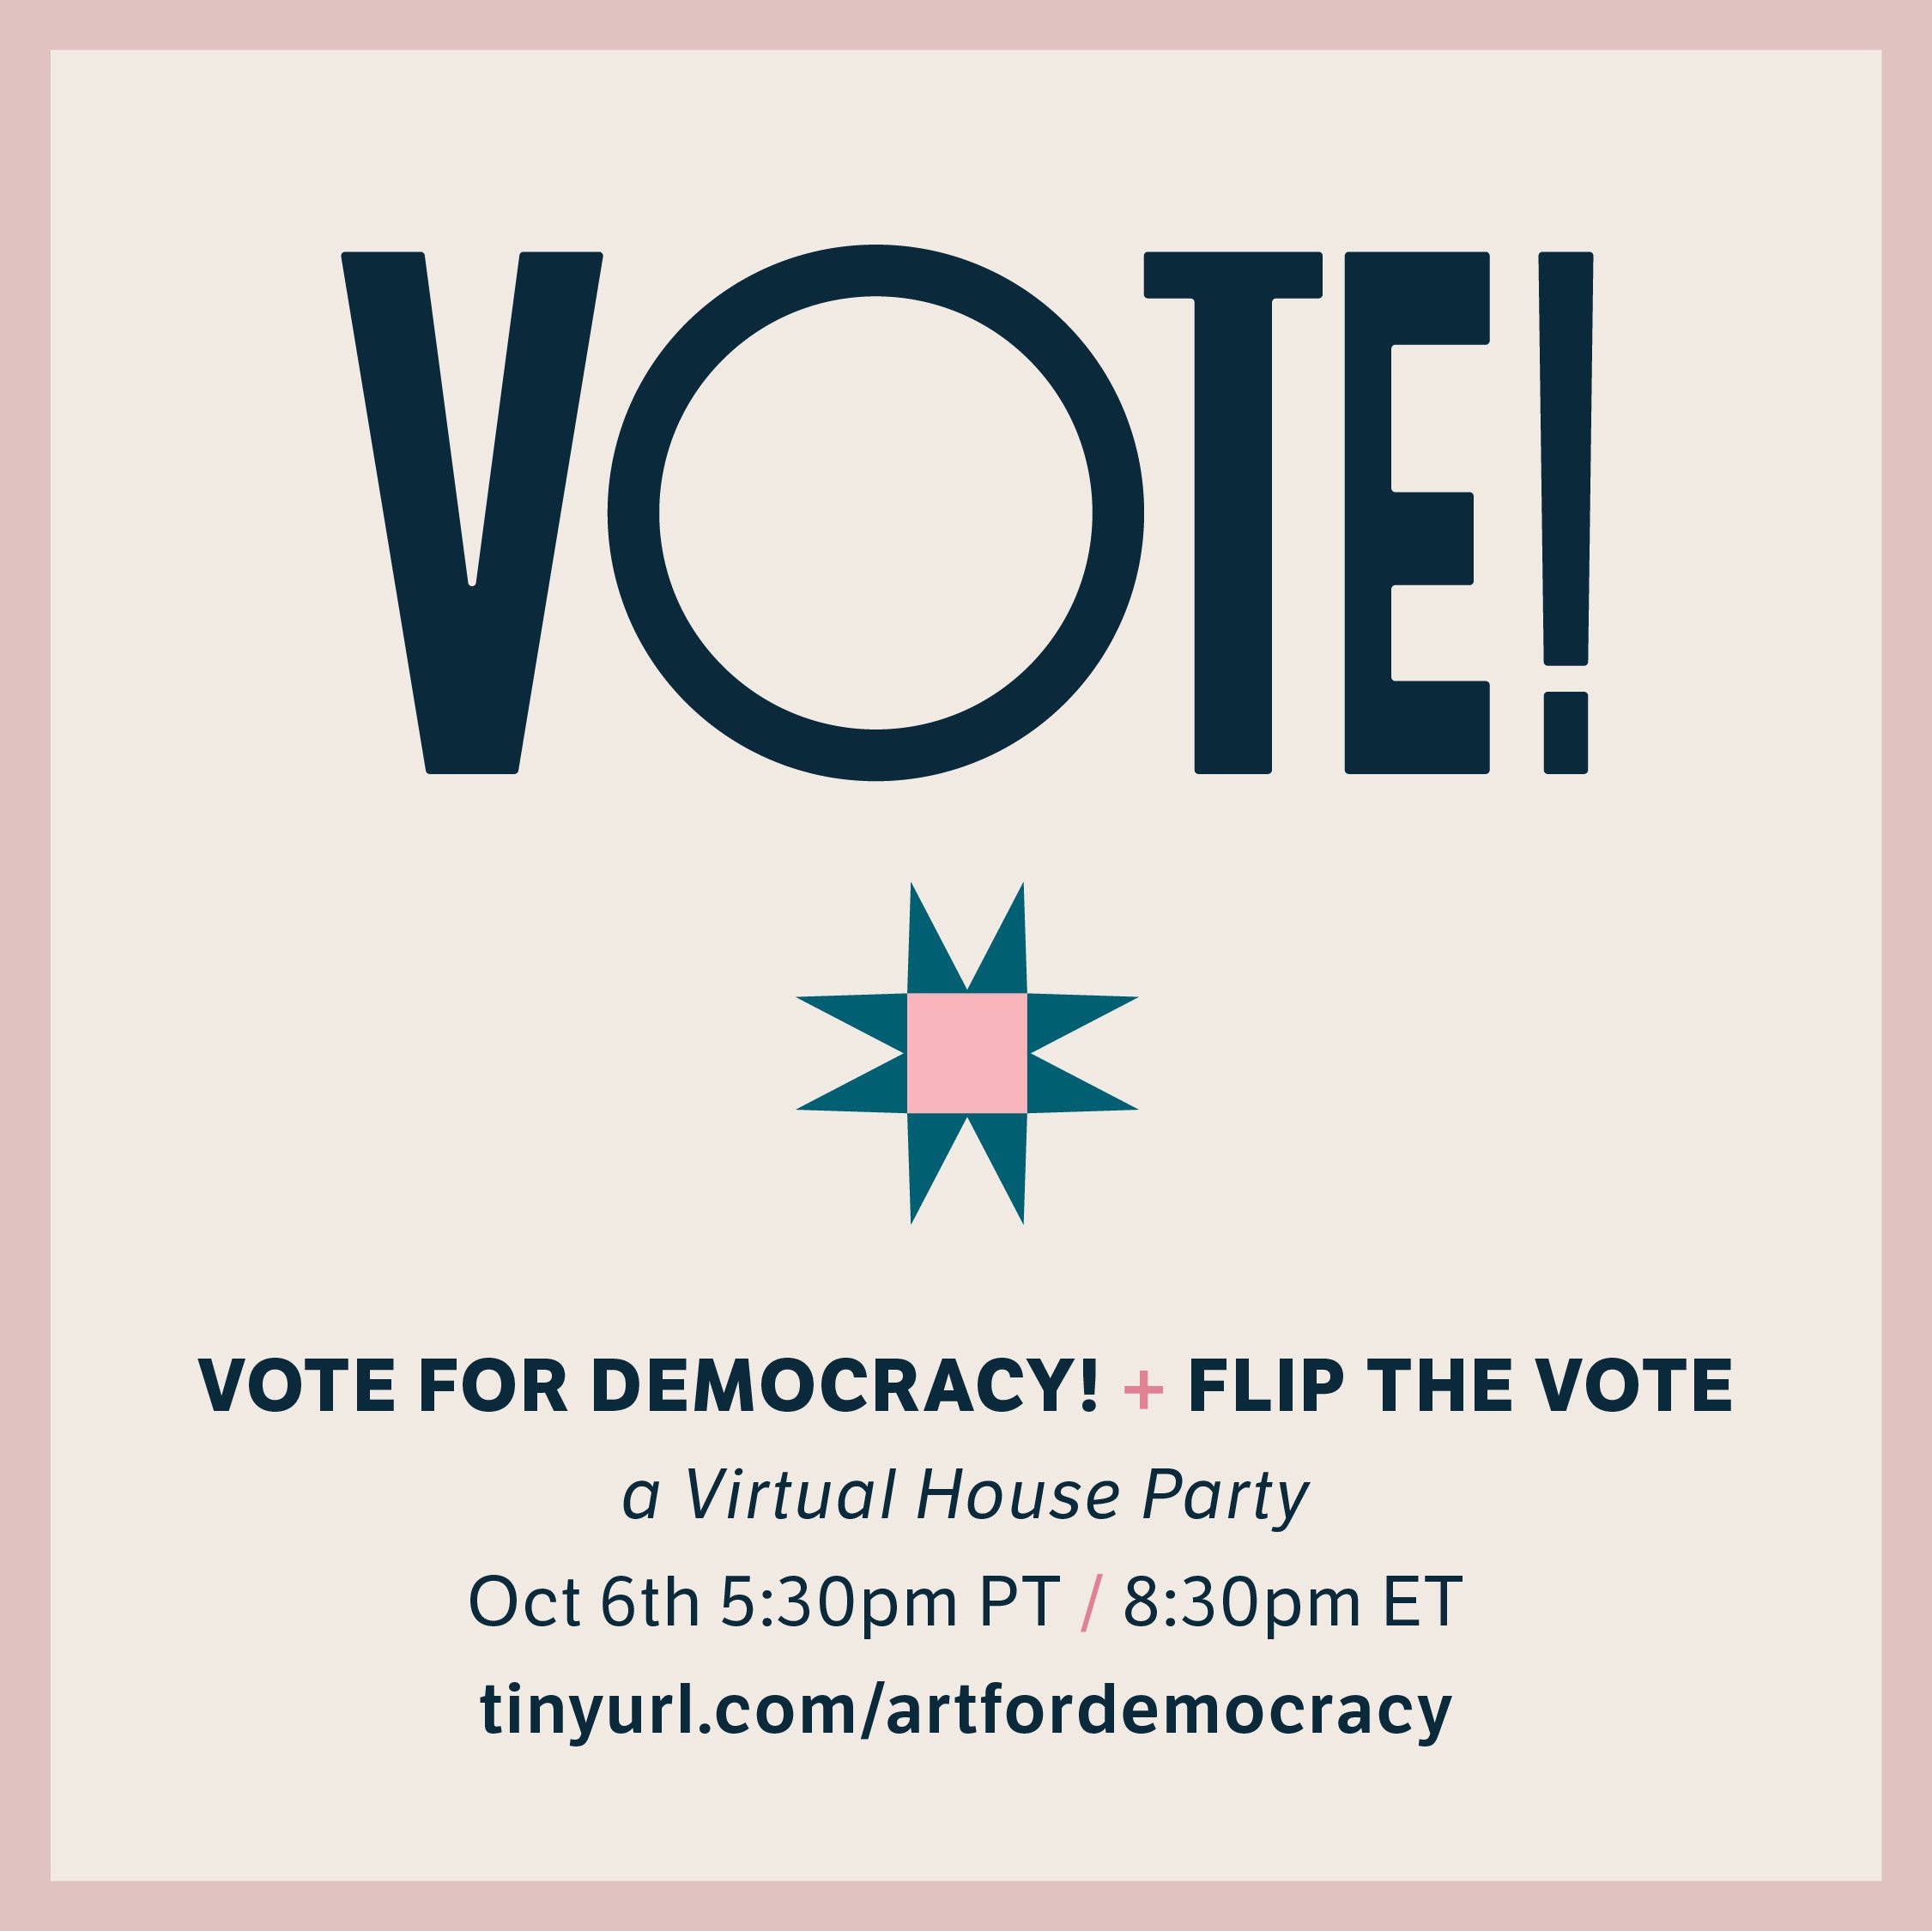 Virtual House Party with Flip the Vote